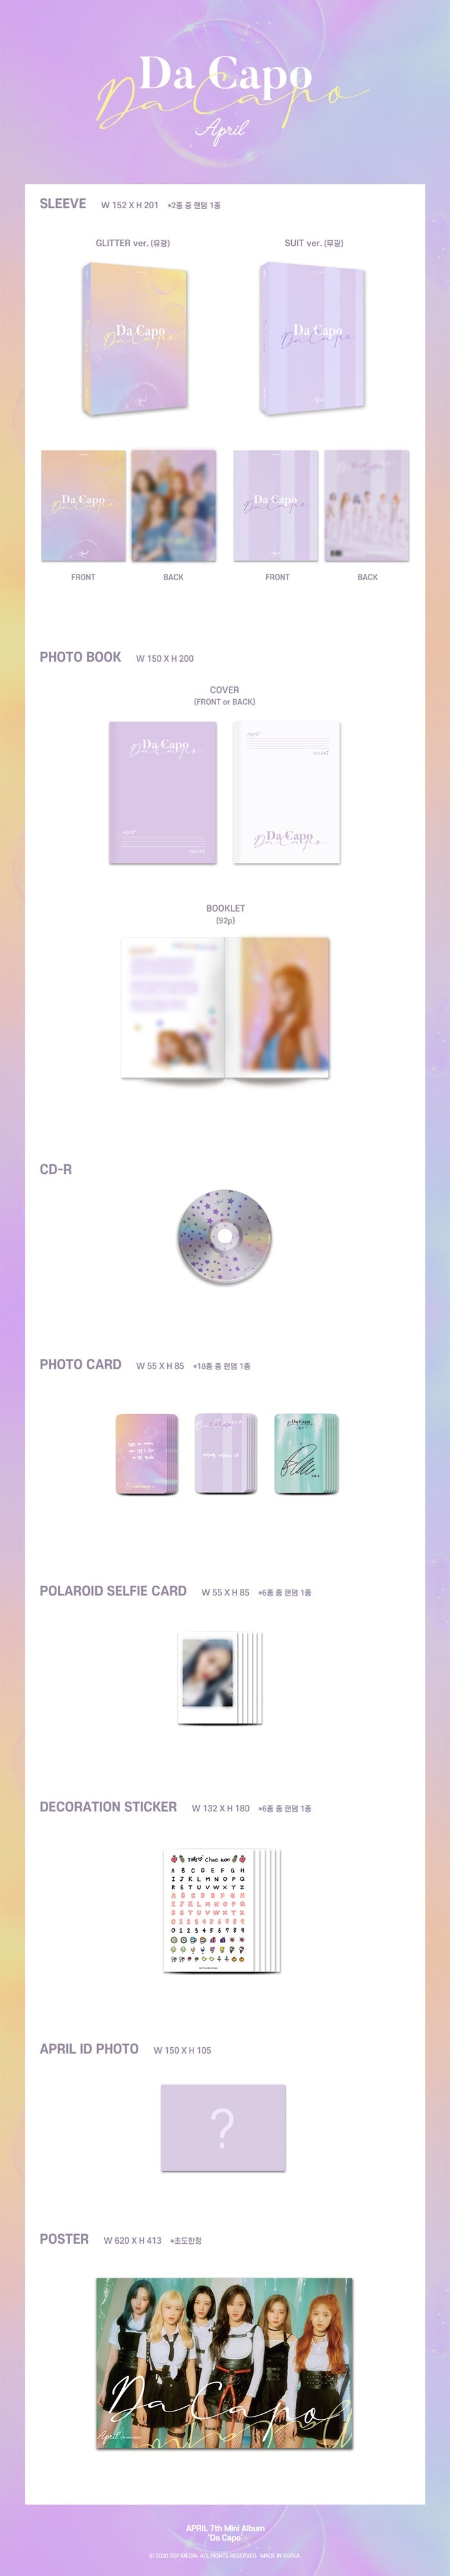 1 CD
1 Photo Book (92 pages)
1 Photo Card
1 Polaroid Selfie
1 Decoration Sticker
1 ID Photo